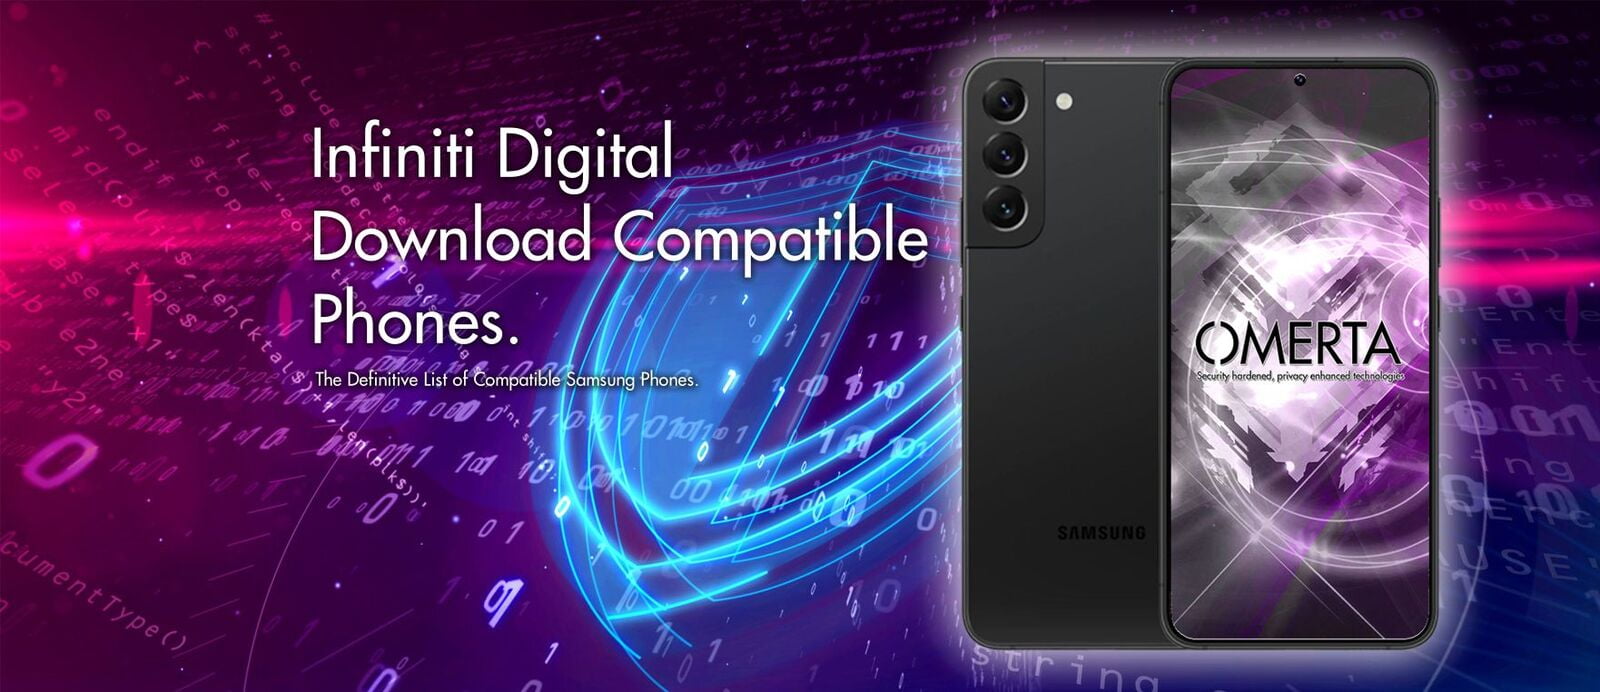 WHICH PHONES ARE COMPATIBLE WITH INFINITI DIGITAL DOWNLOAD